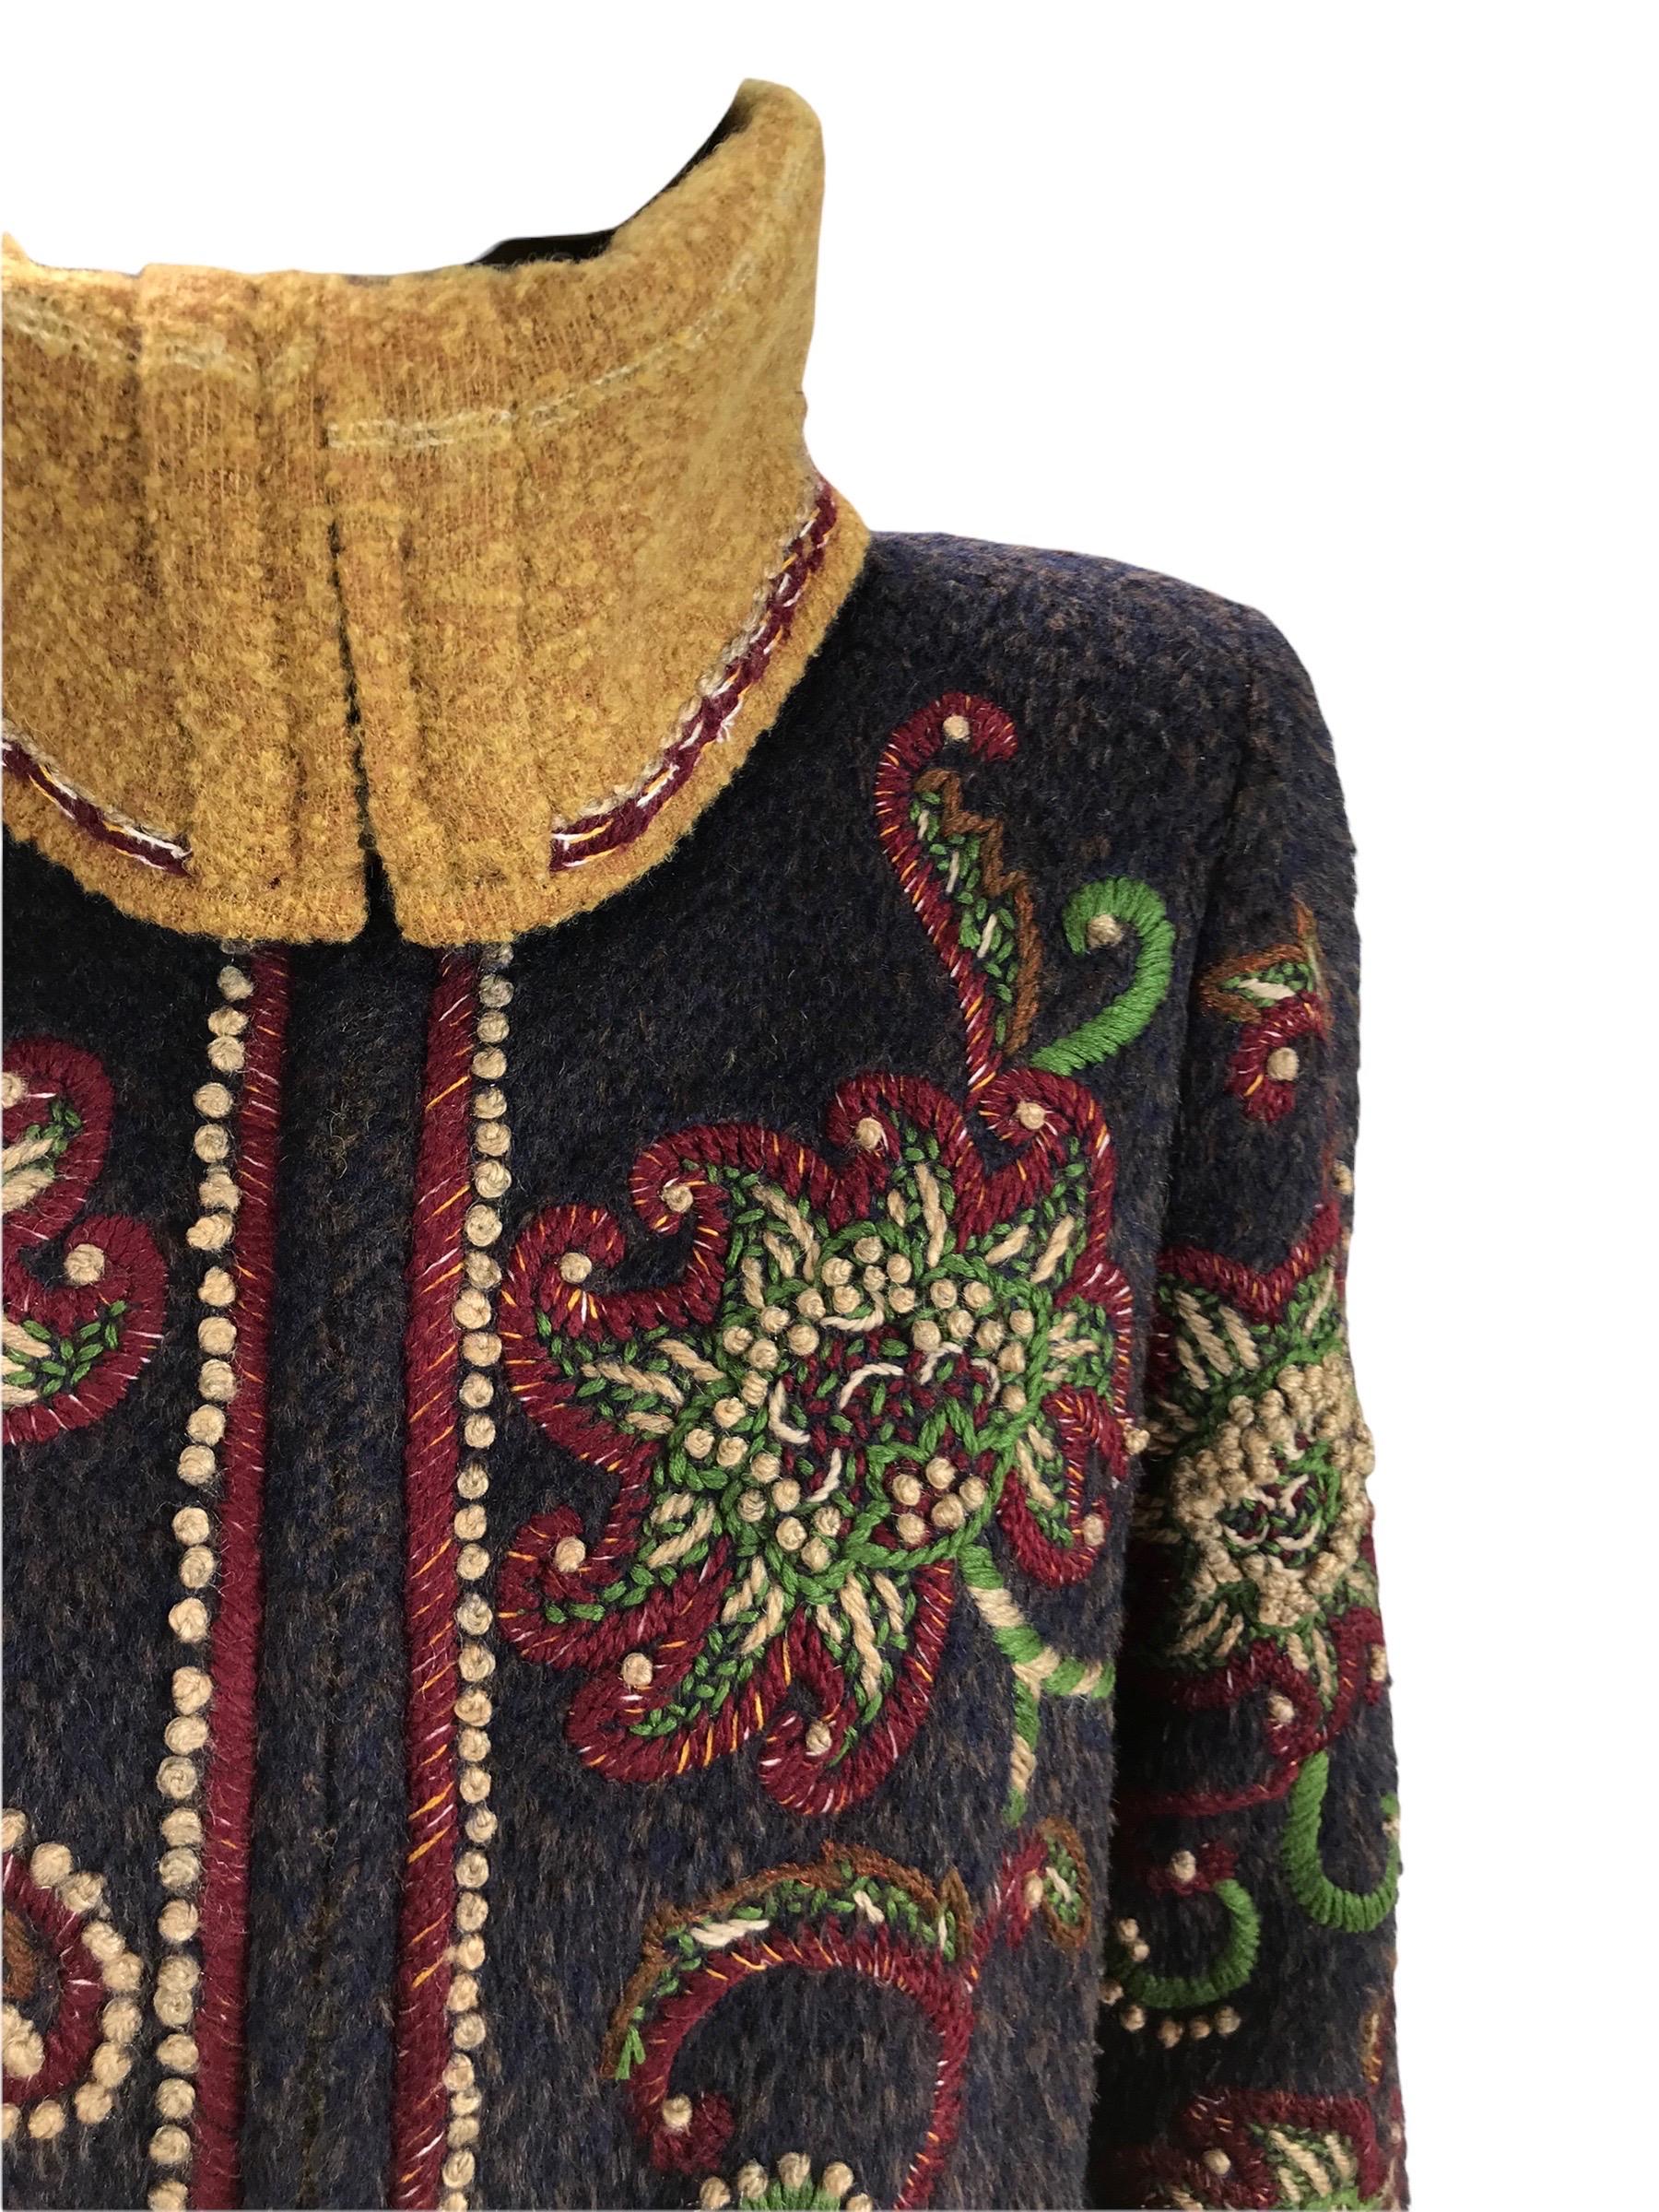 Vintage Oscar de la Renta Fully Embroidered Coat
F/W 2000 Runway Collection
USA size - 4
Exquisite Flower Embroidery in Burgundy, Green and Yellow Tones over the Chocolate Brown Background. 
Two Side Pockets. Oversize Collar Can be Zipped for